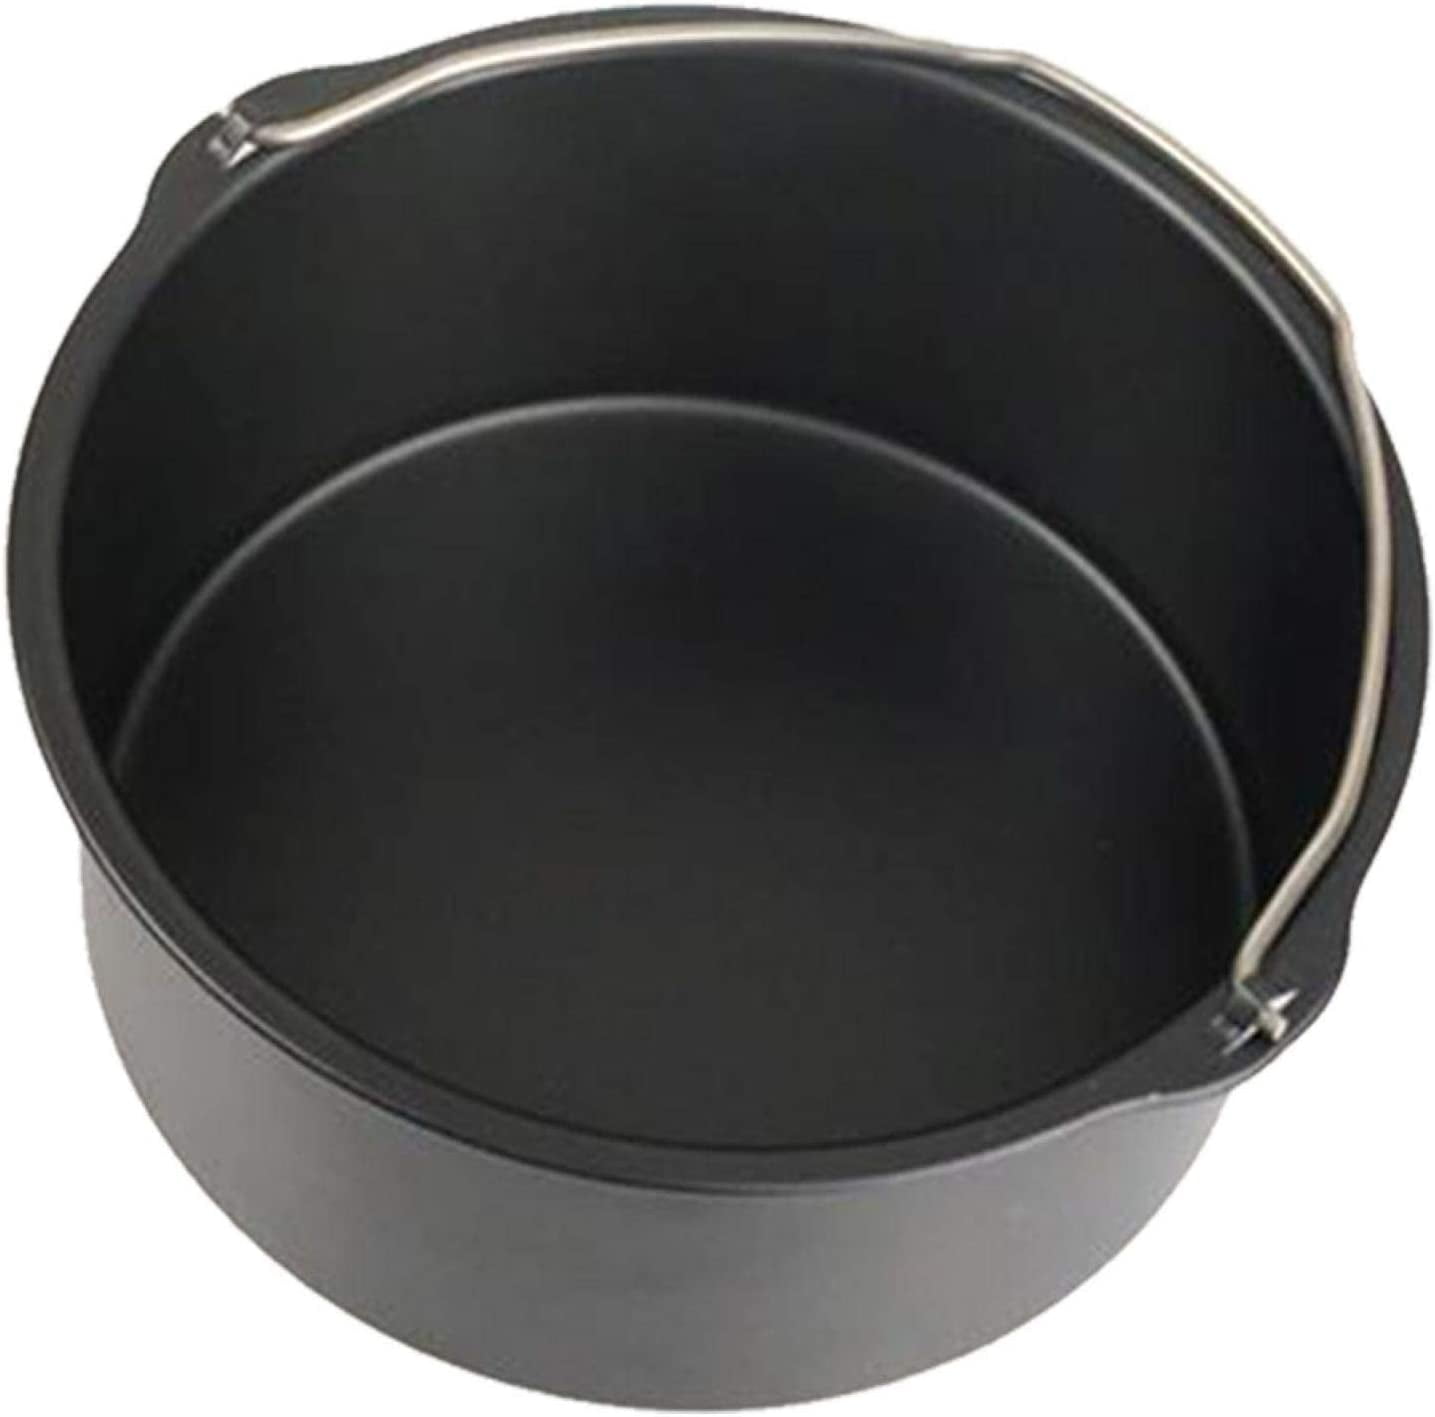 Round Cake Pan by Celebrate It®